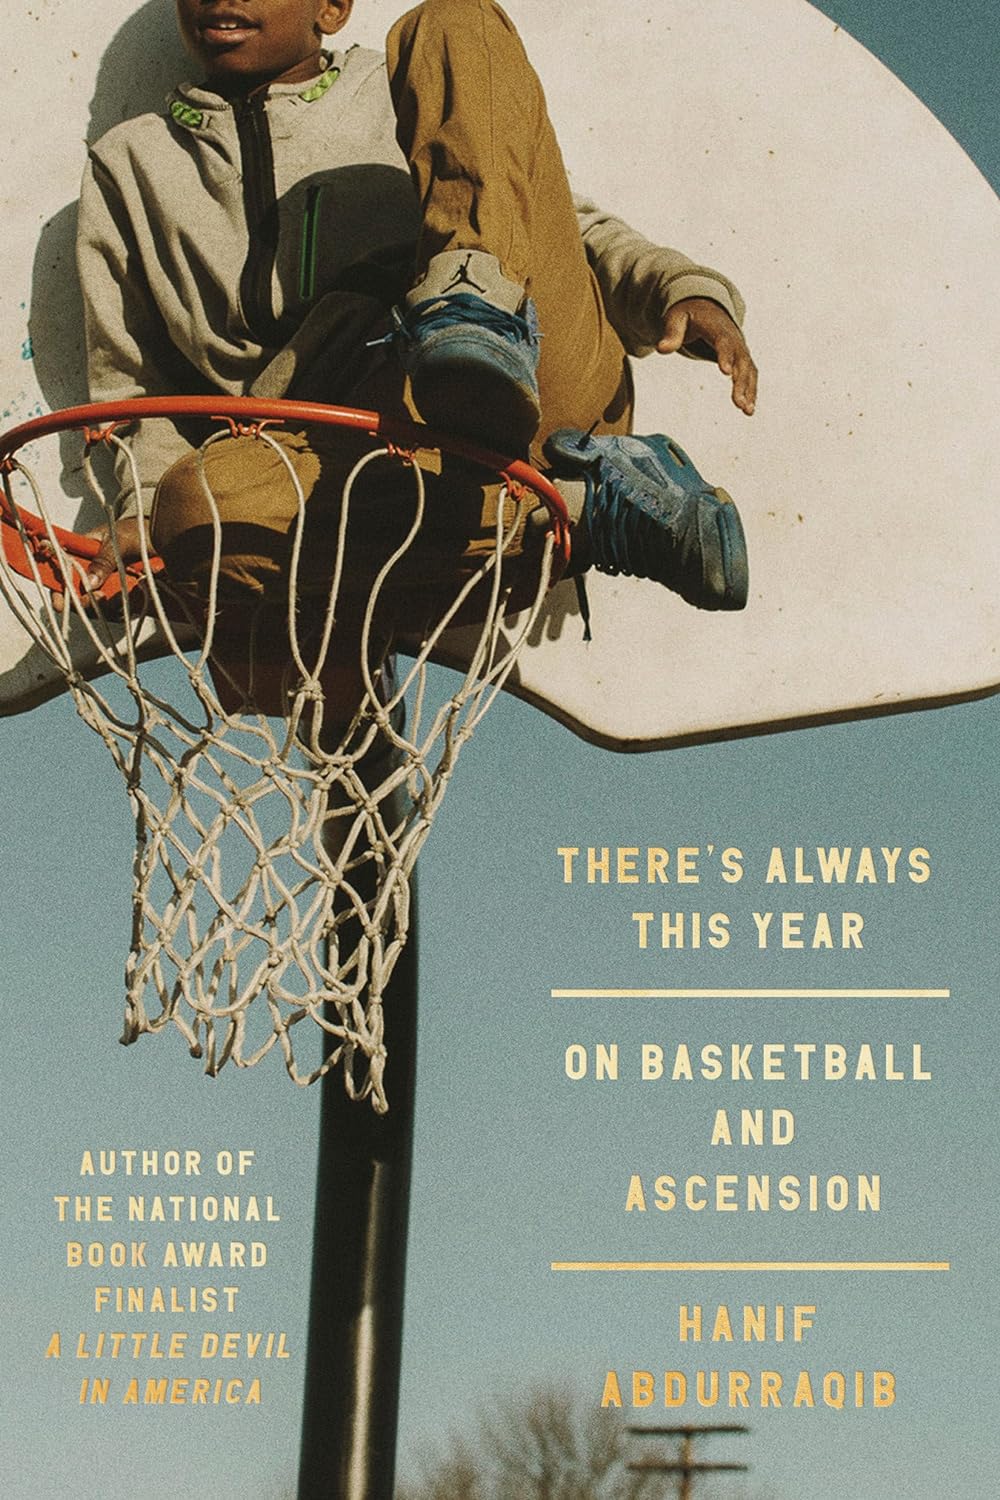 The cover of There's Always This Year: On Basketball and Ascension